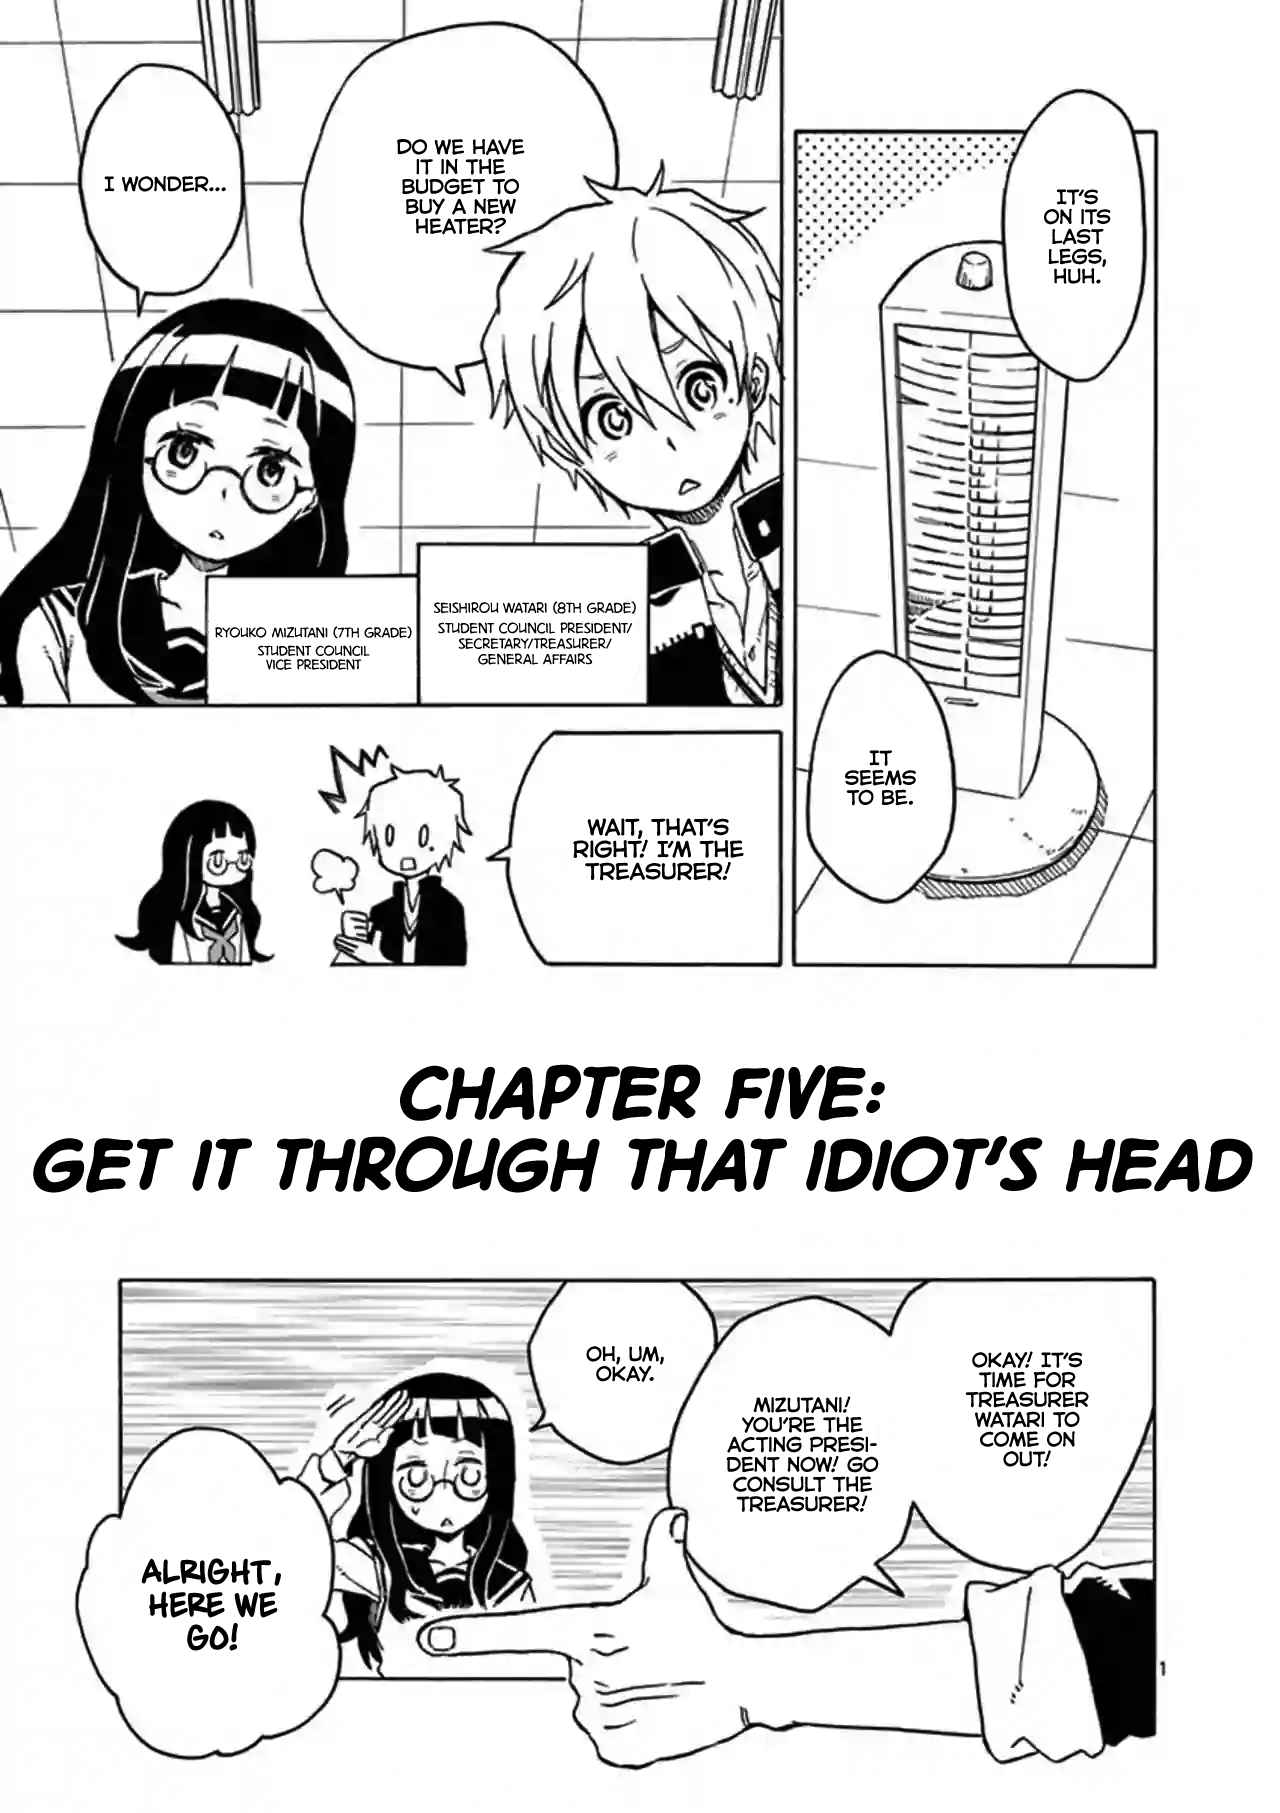 Student Council for Two Ch. 5 Get it Through That Idiot's Head